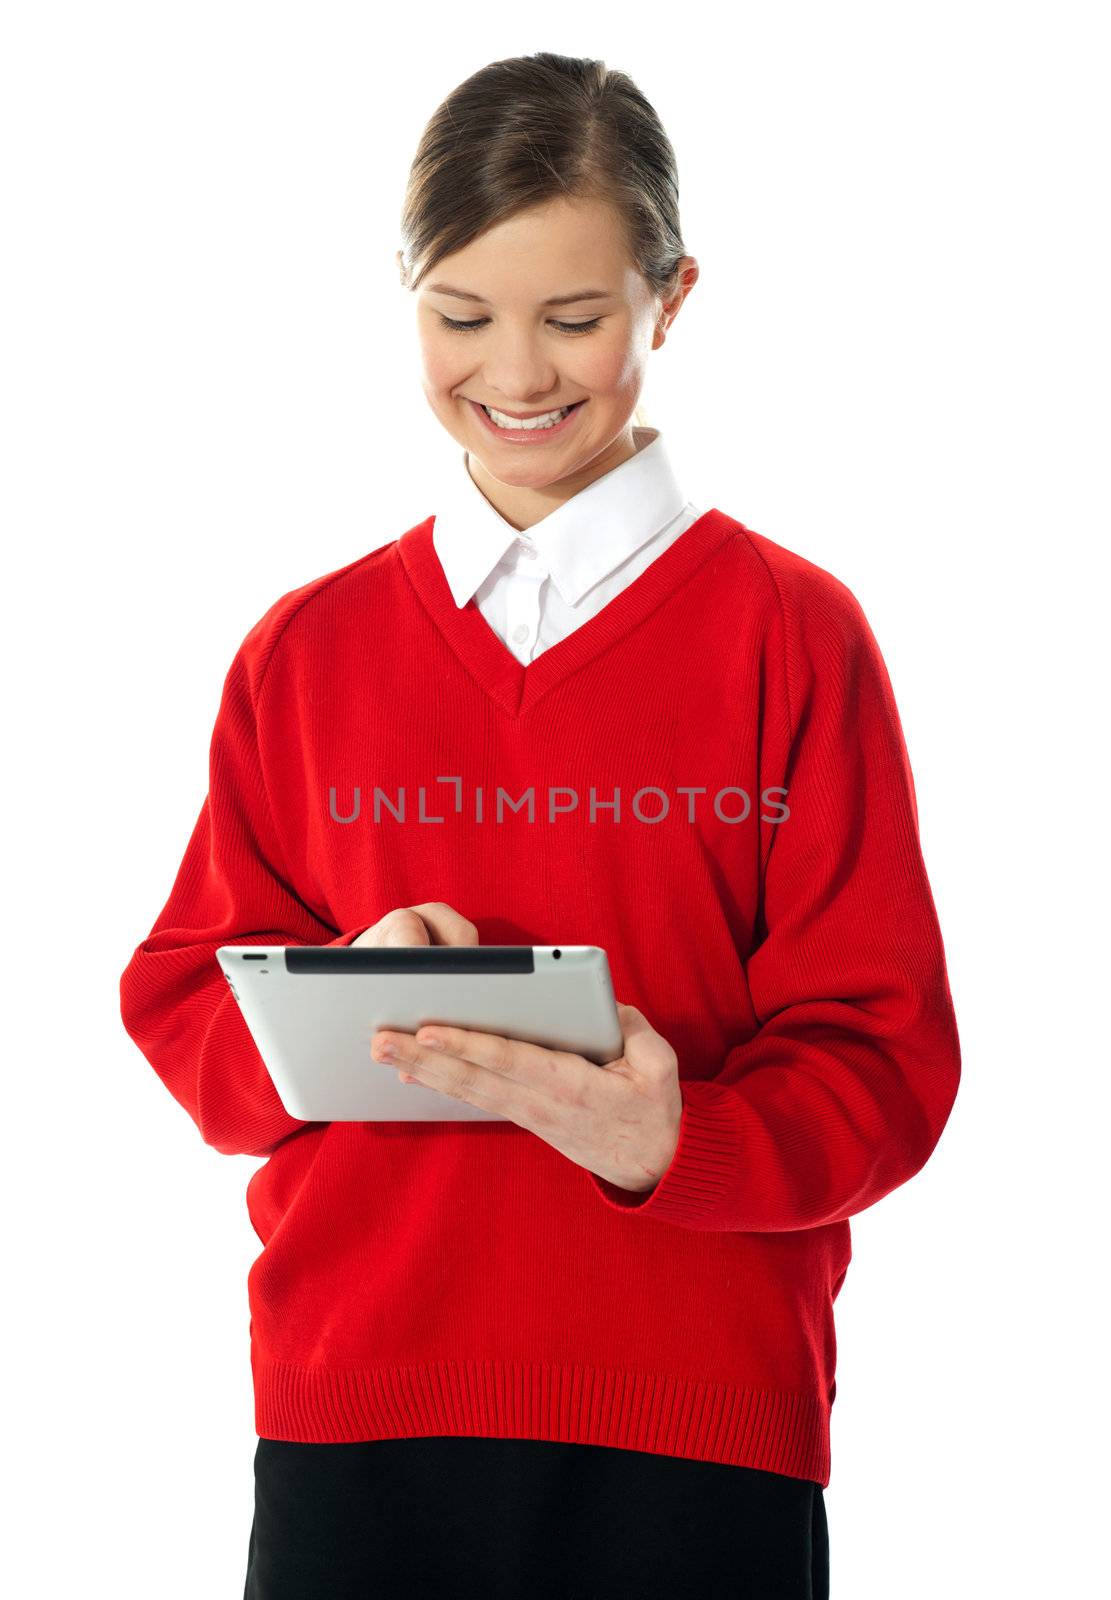 School girl using new touch pad device by stockyimages